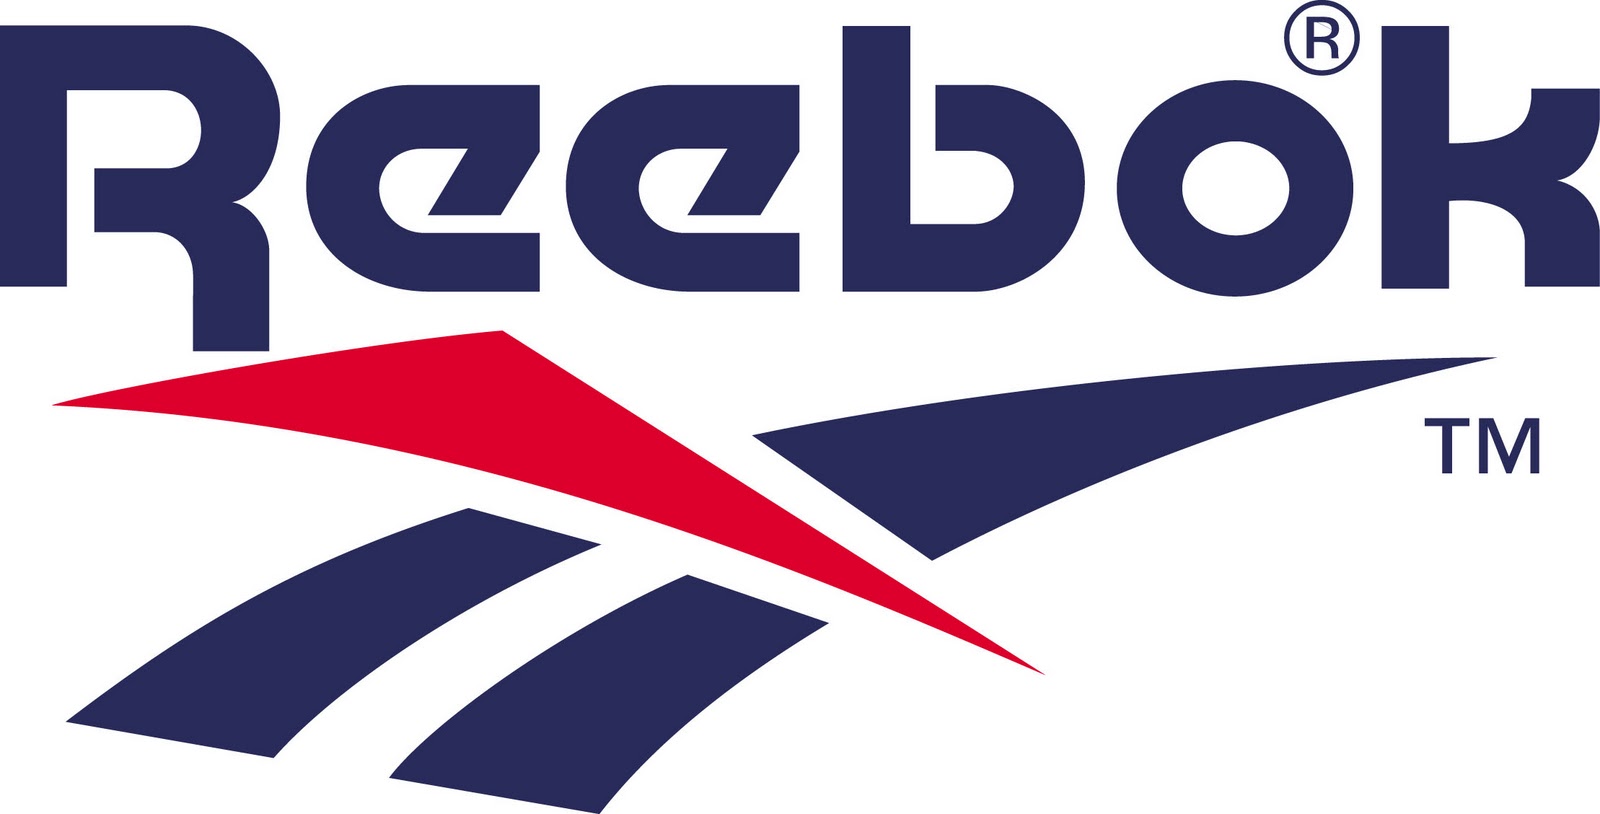 Everything About All Logos: Reebok History